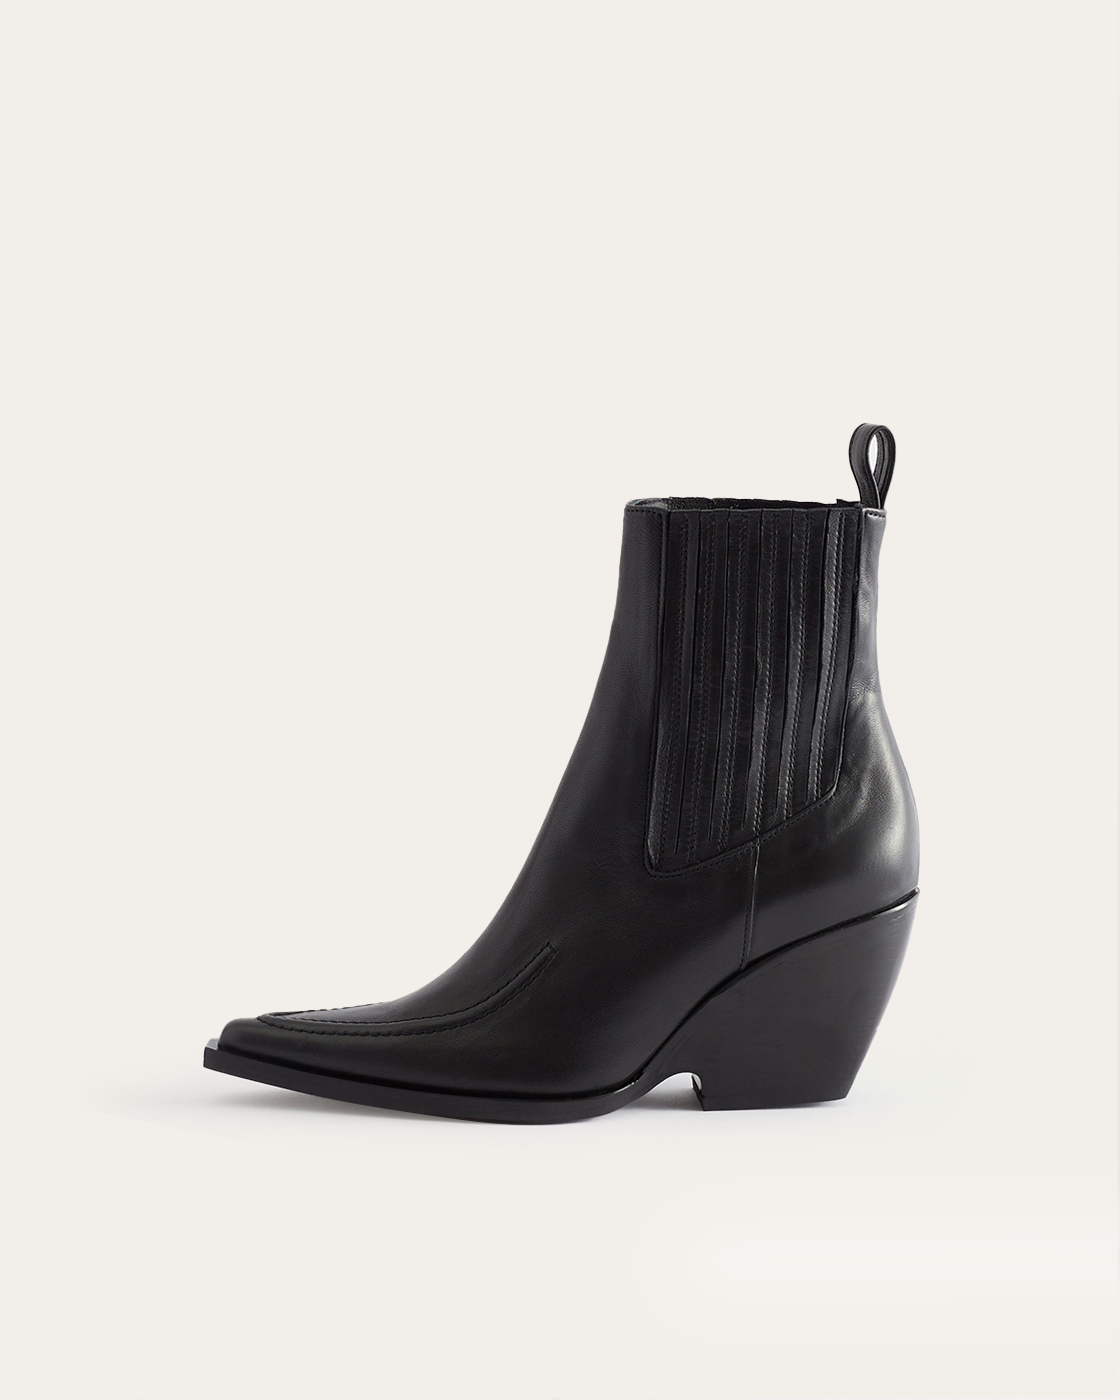 Sidney Boots Nappa Leather Black